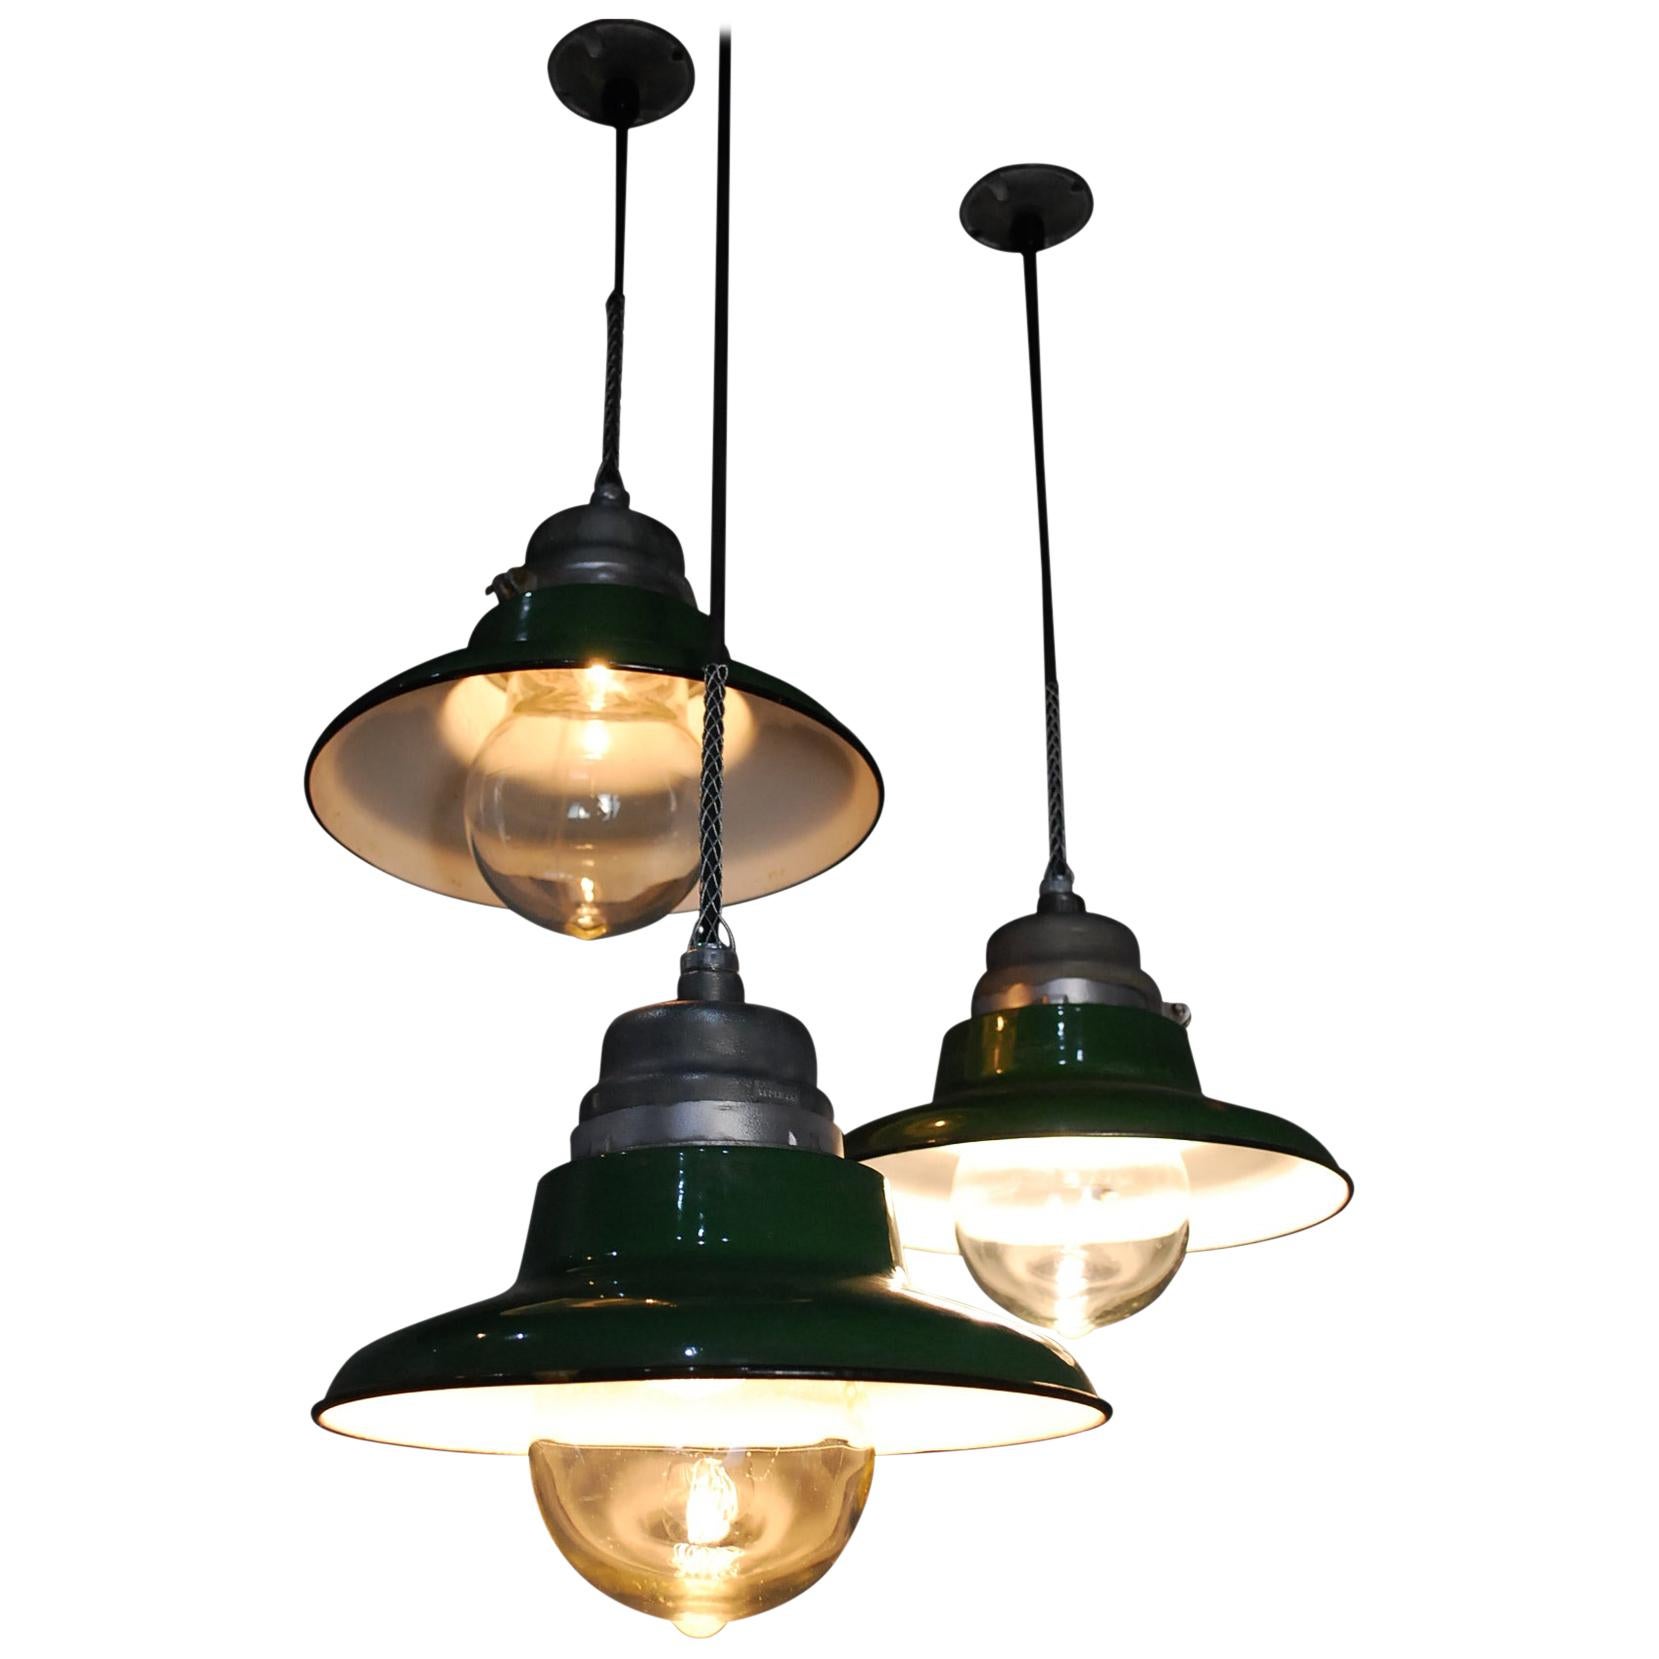 Set of 20 1930 Industrial Crouse Hinds Pendants Lights